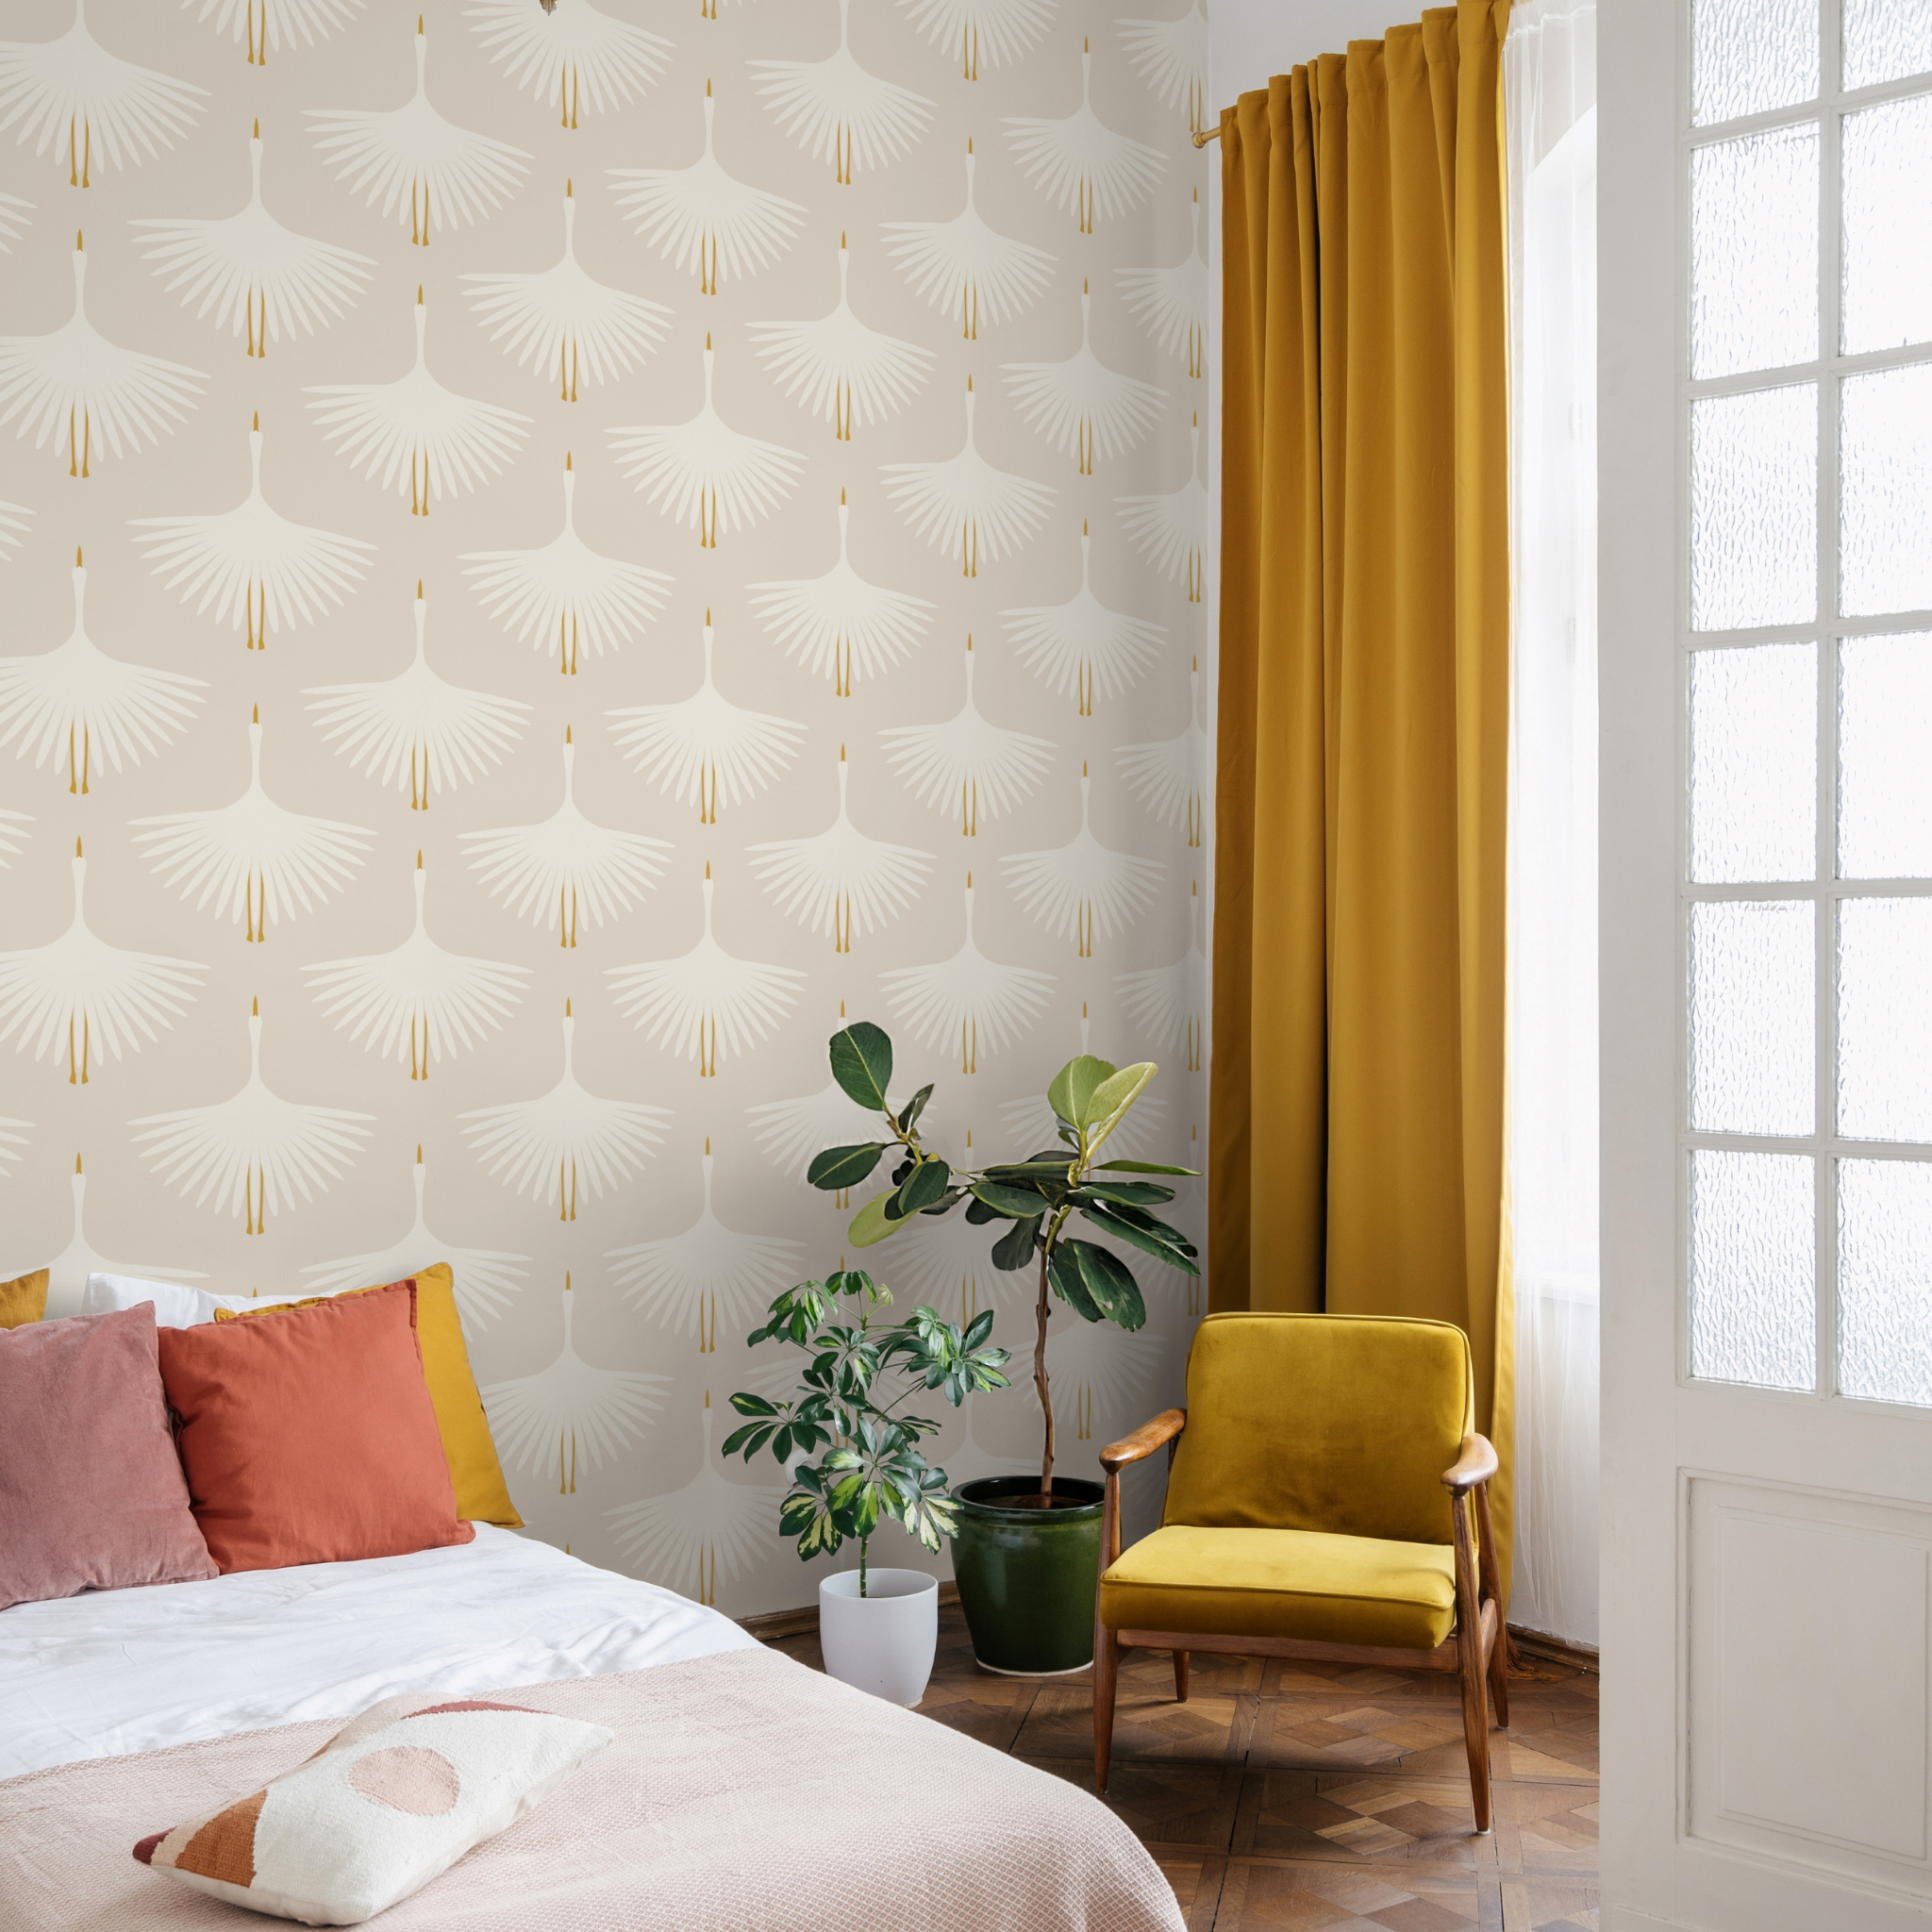 "Wall Blush Alba Cream Wallpaper in a cozy bedroom with yellow accents and green plants."